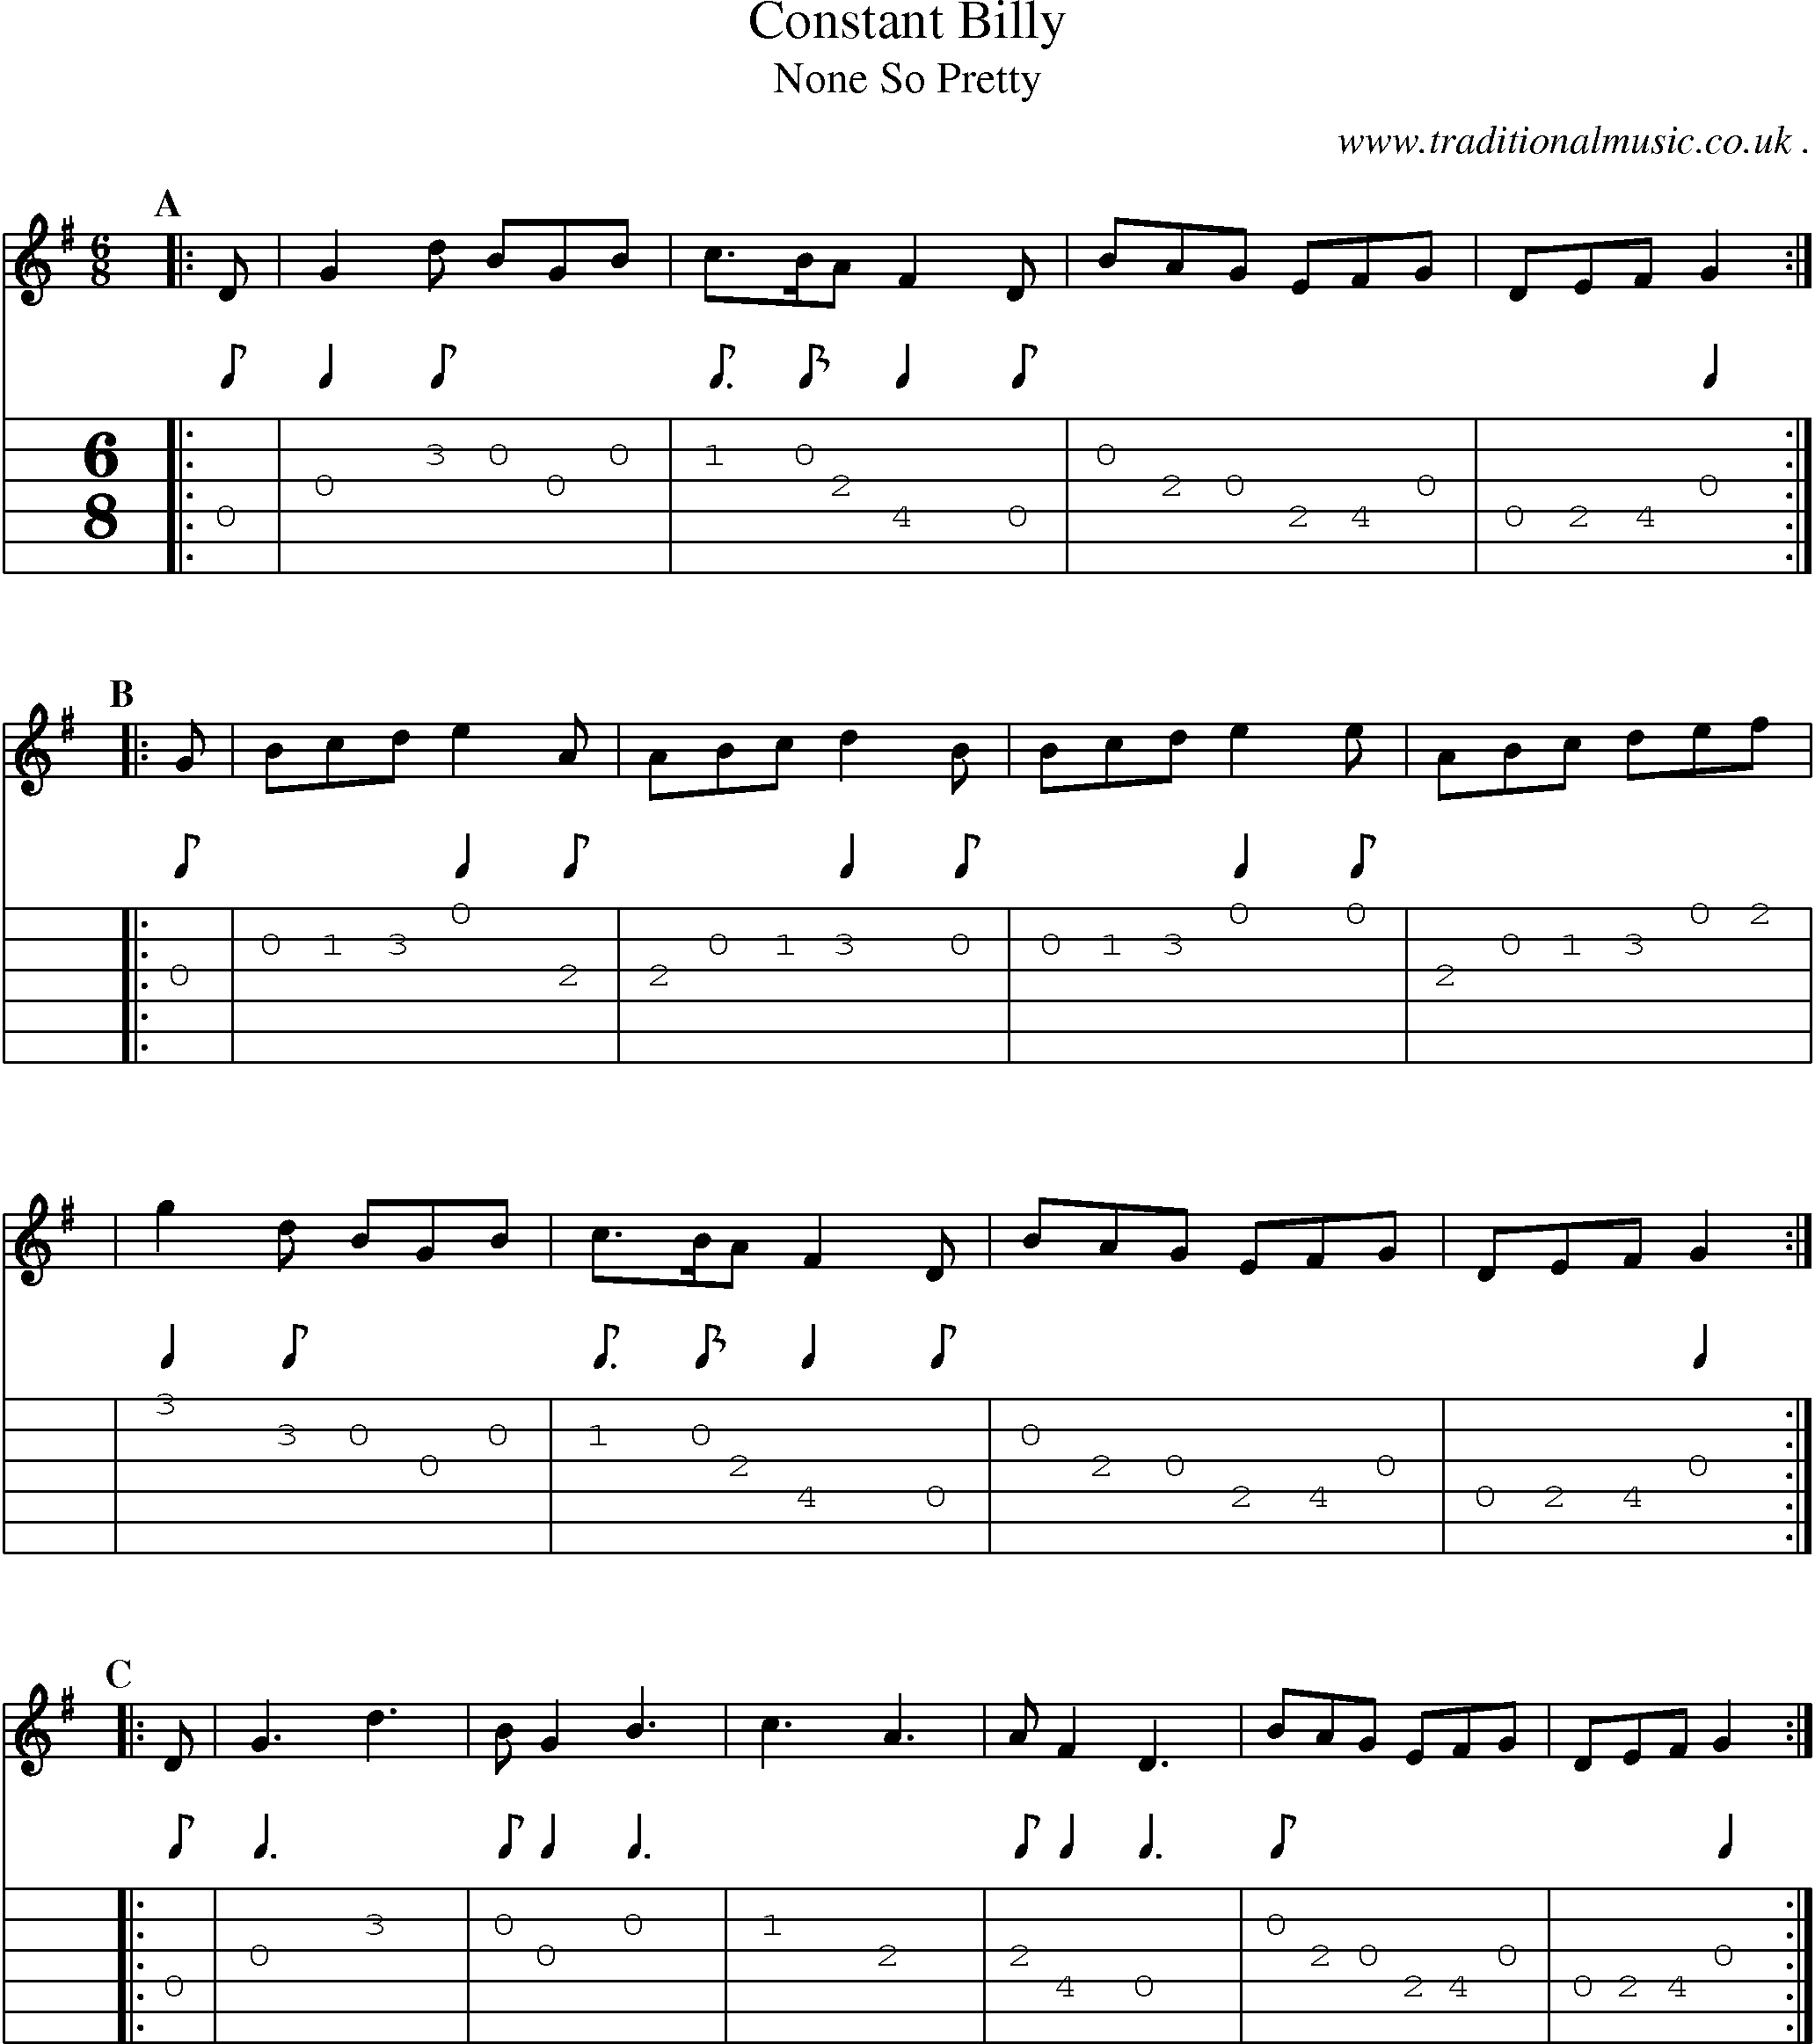 Sheet-music  score, Chords and Guitar Tabs for Constant Billy